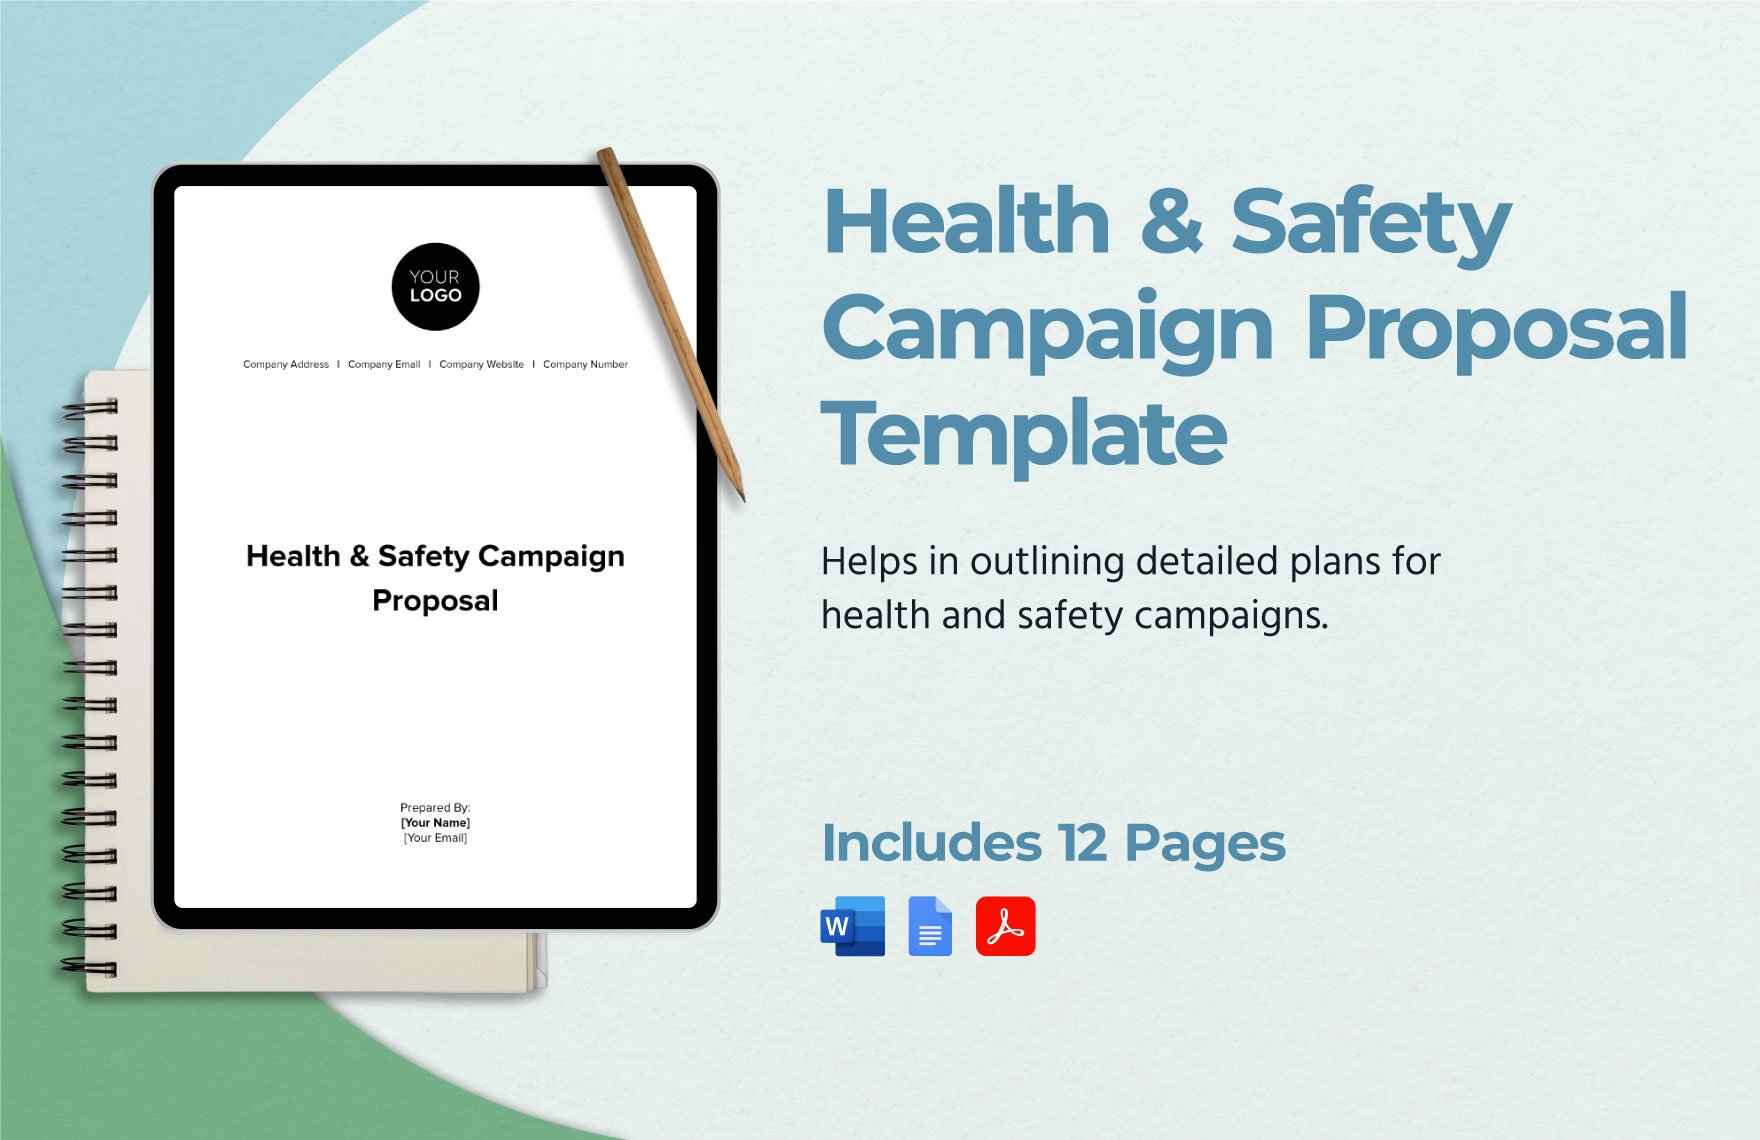 Health & Safety Campaign Proposal Template